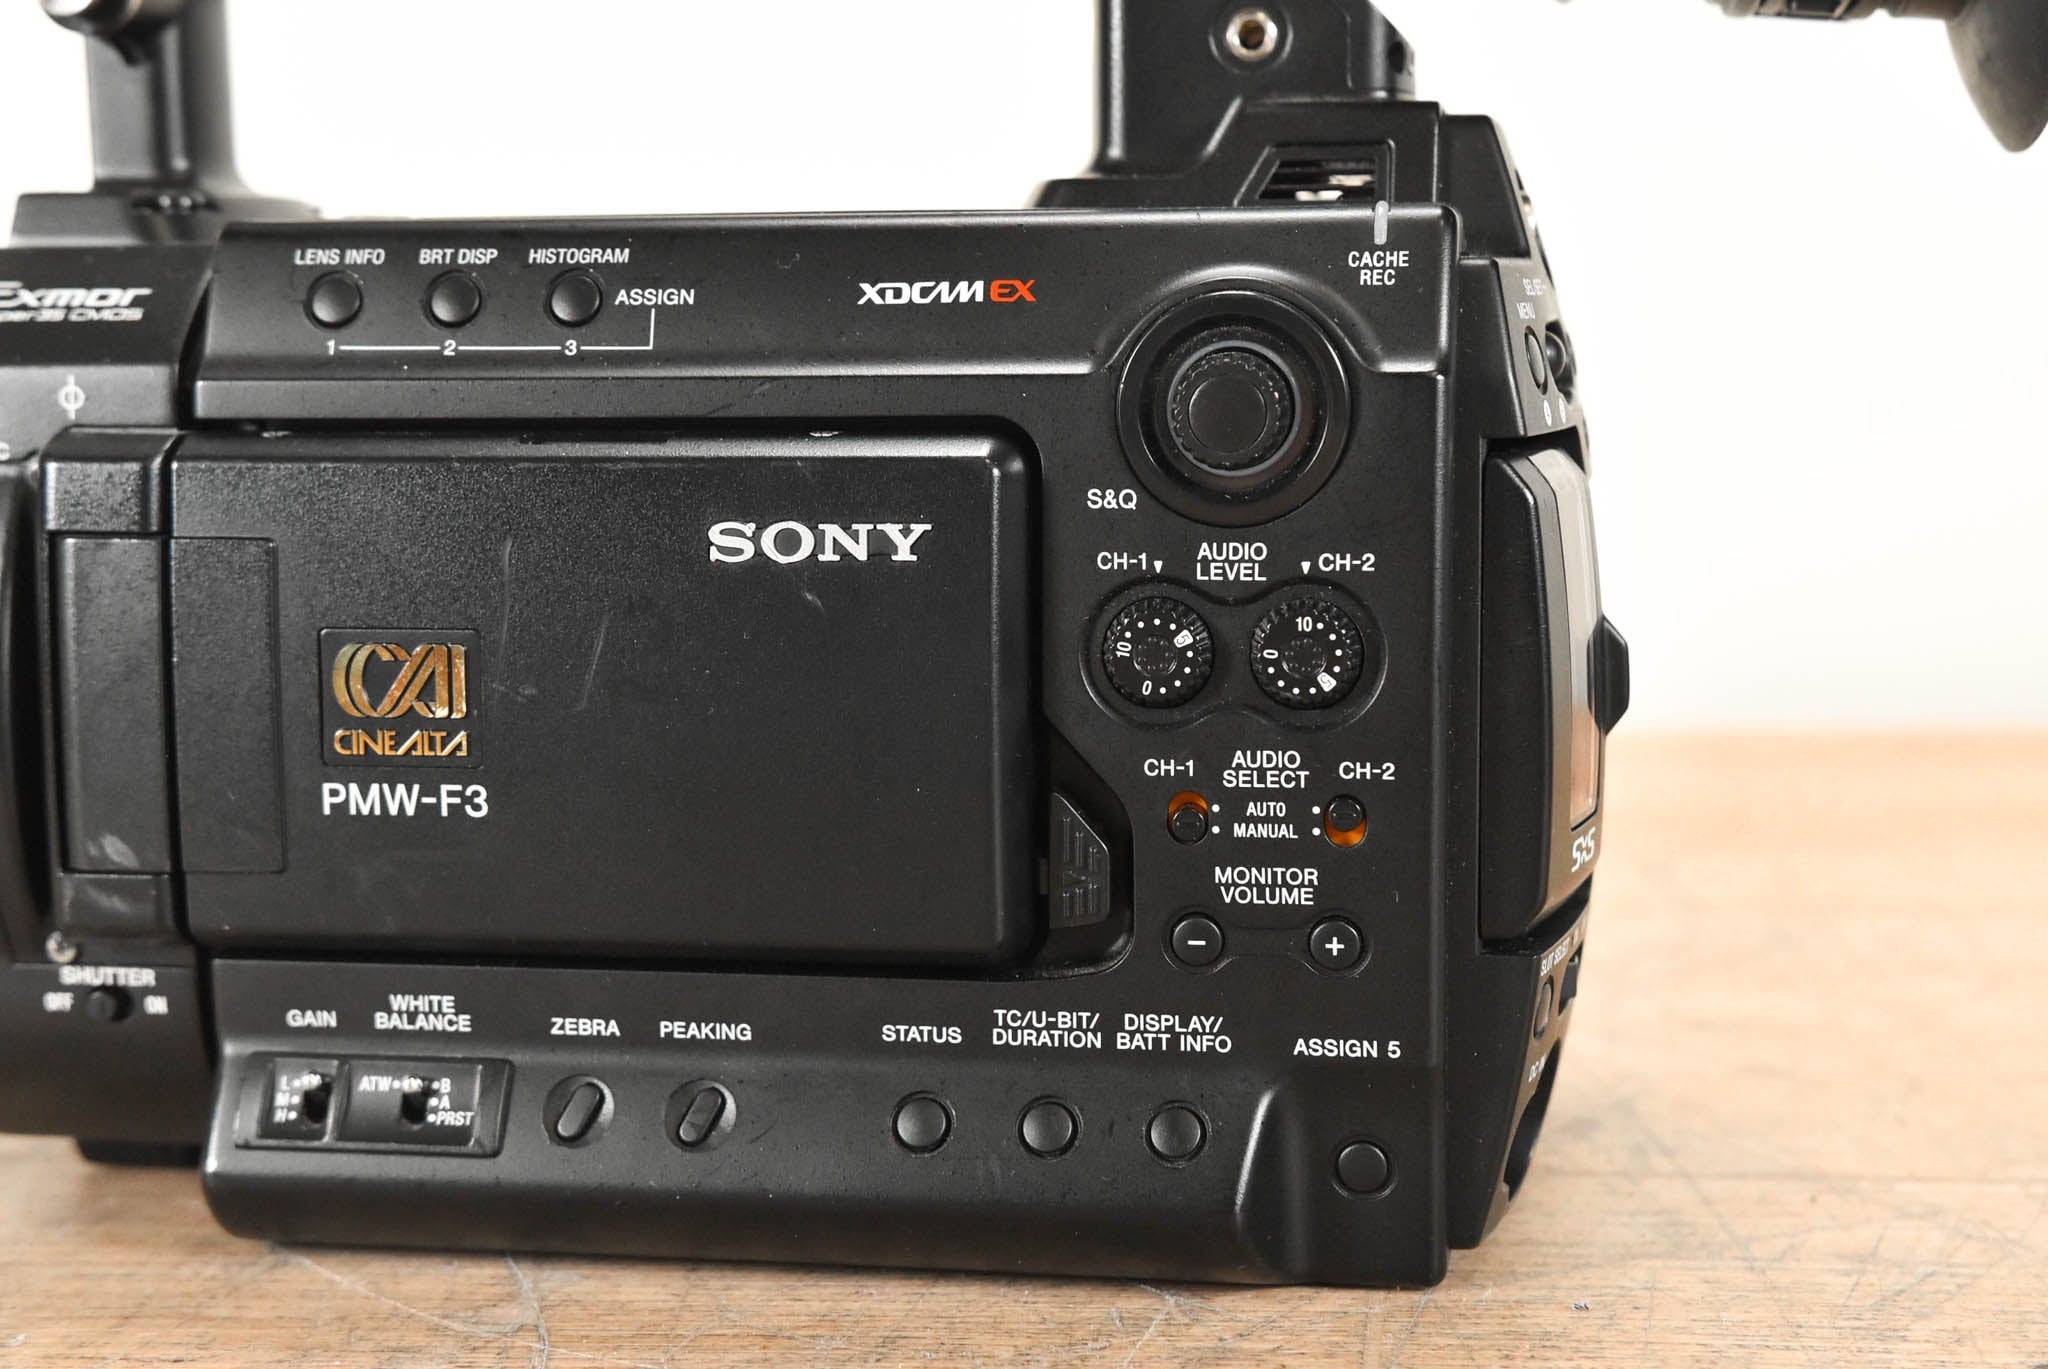 Sony PMW-F3 Super 35mm XDCAM EX Full-HD Compact Camcorder